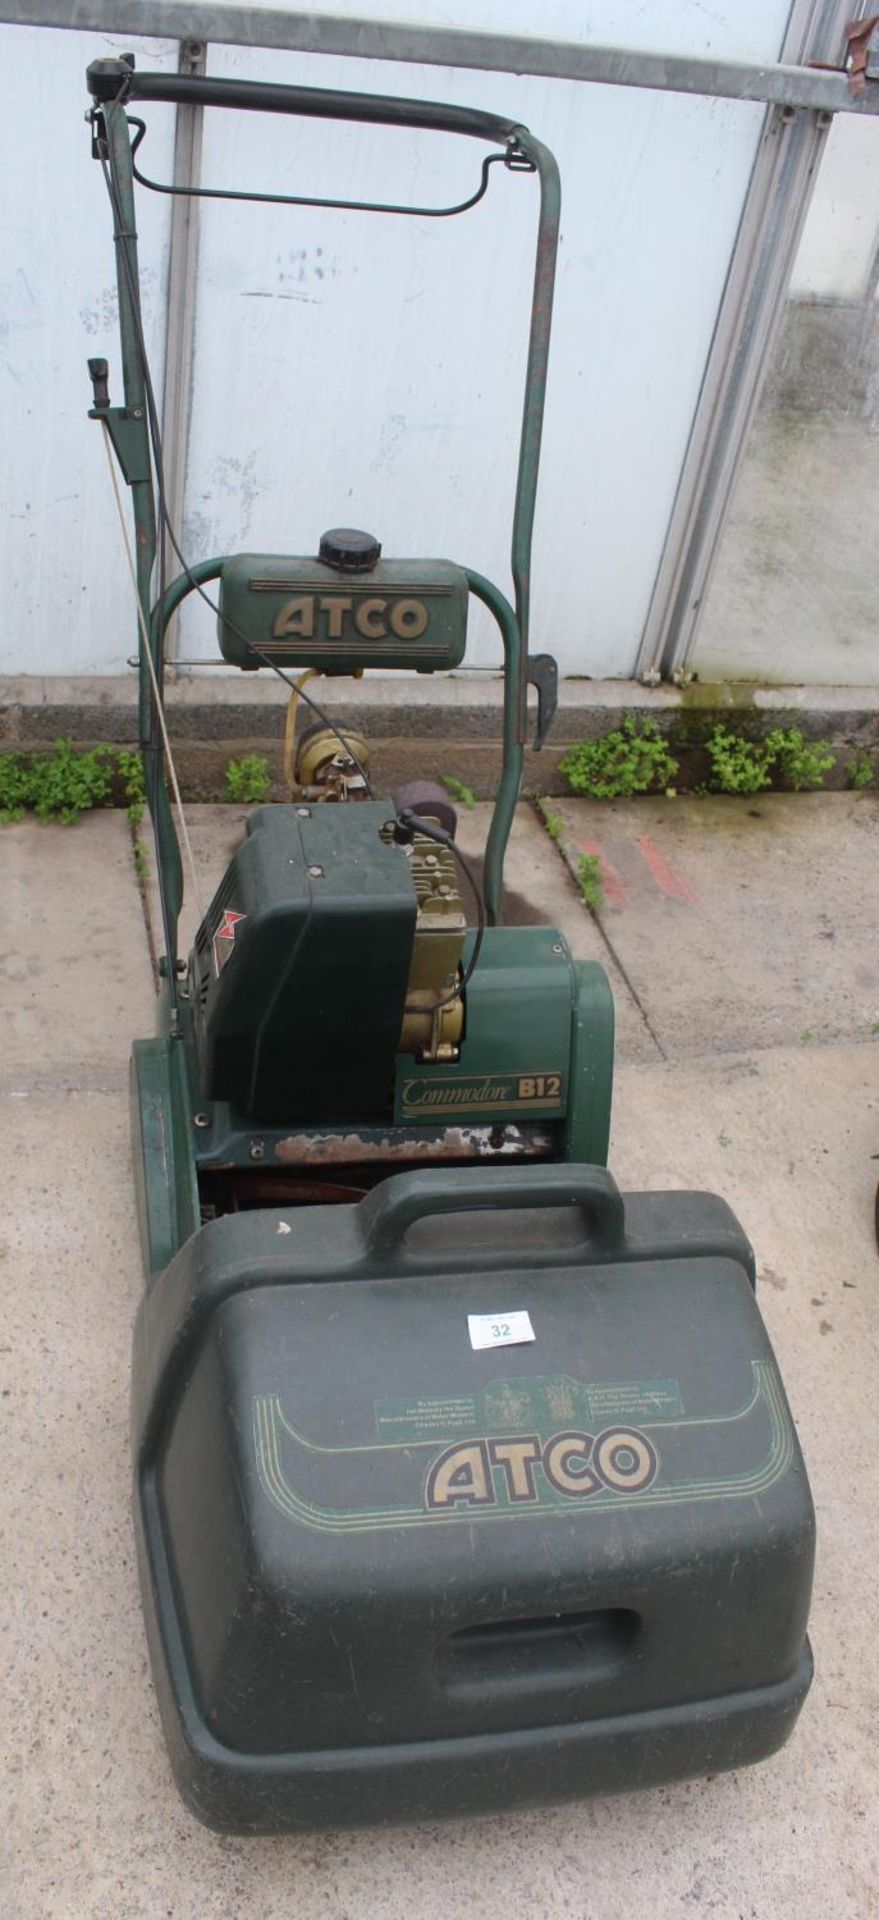 A PETROL CYLINDER COMMORE B12 ATCO LAWNMOWER COMPLETE WITH GRASS BOX AND MANUAL BELIEVED IN